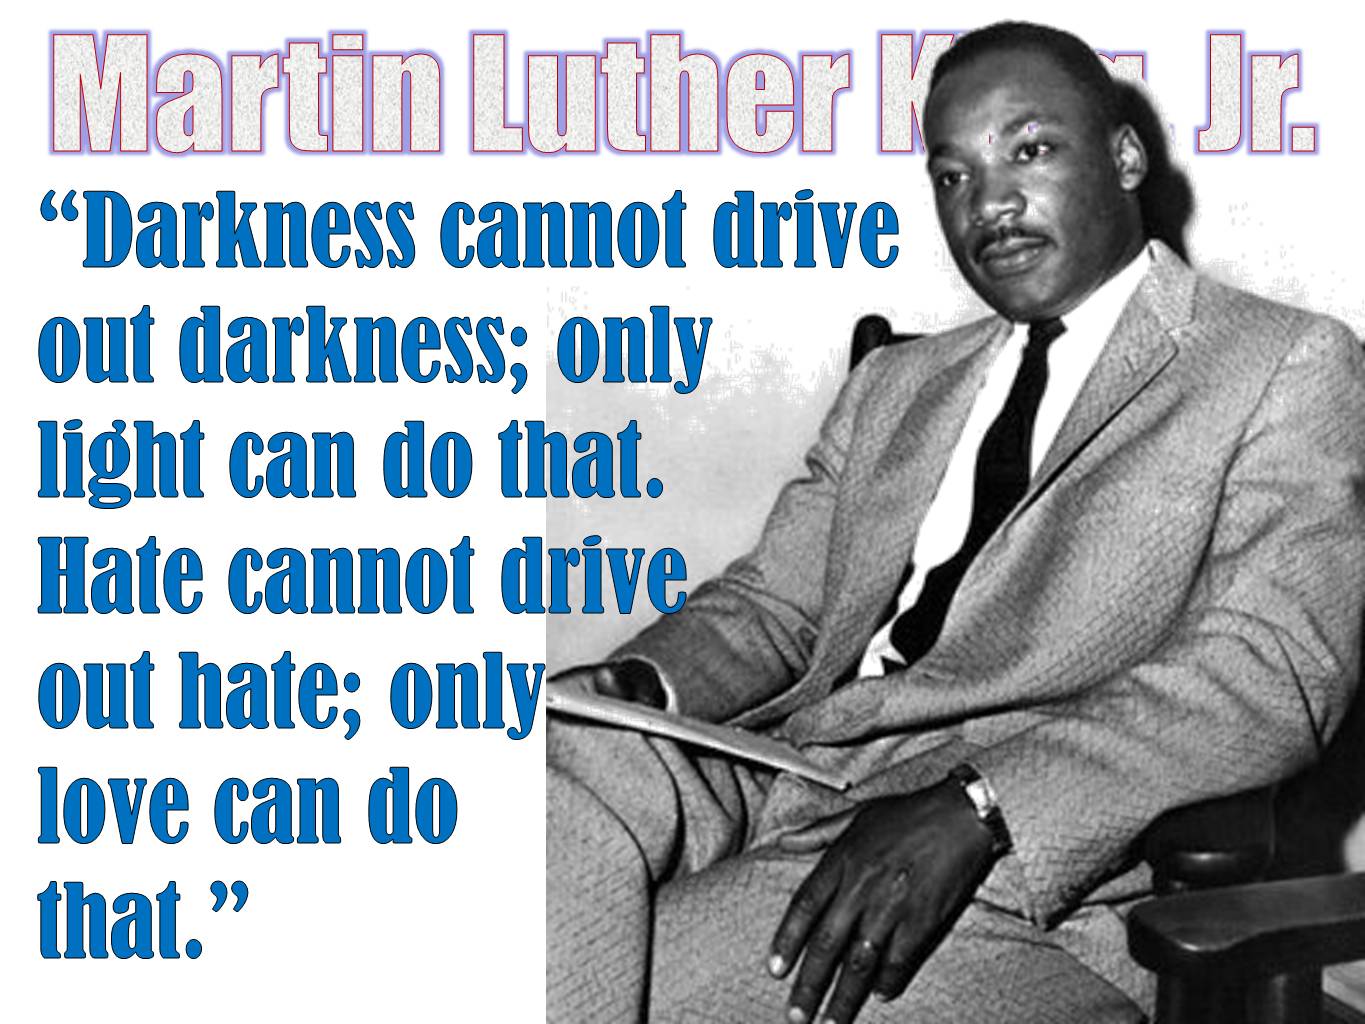 martin luther king jr quotes change1365 x 1024